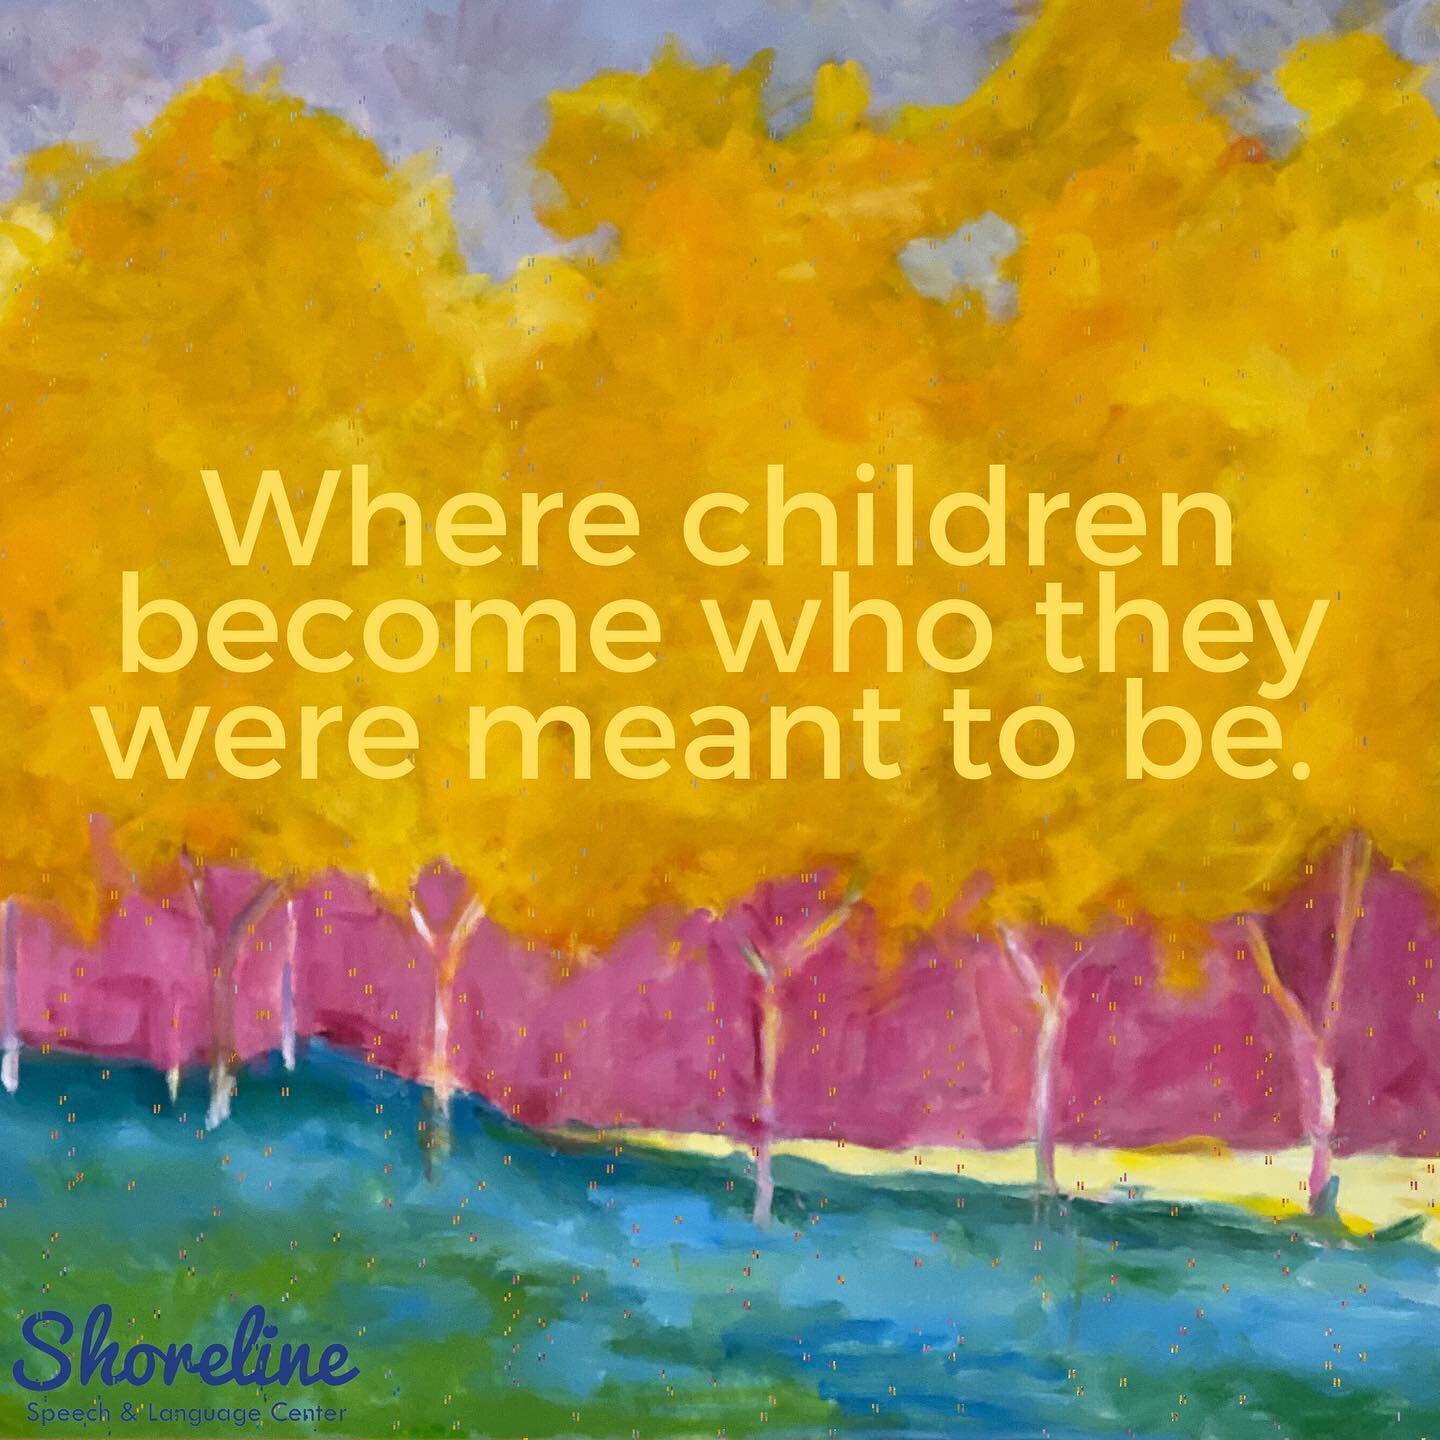 At Shoreline, our goal is to help your child grow into the best version of themselves. Every child is different, which is why we individualize their treatment plans to grow their speech and language skills while celebrating their uniqueness.